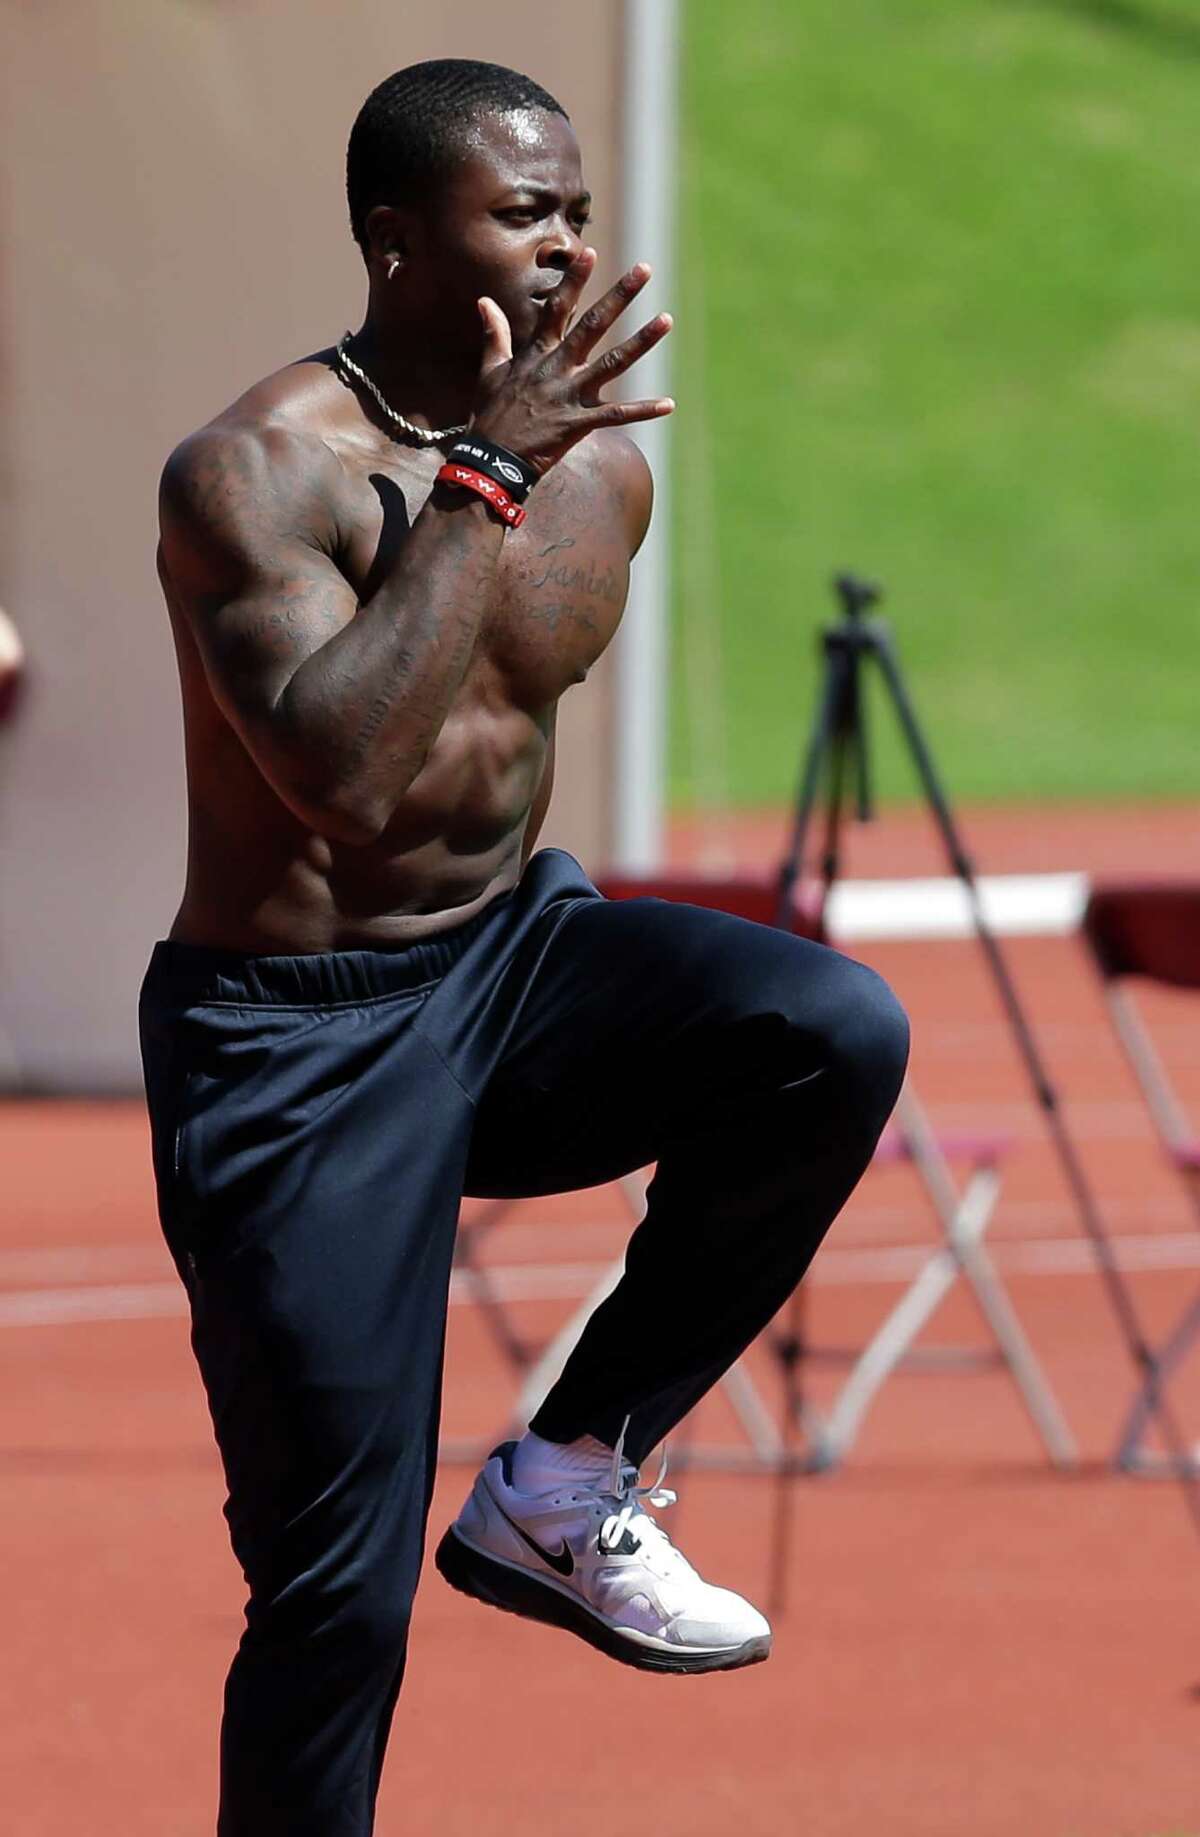 United States long jumper Marquise Goodwin trains for the 2012 Summer Olympics, Monday, July 23, 2012, in Birmingham, England. The opening ceremonies of the Olympic Games are scheduled for Friday, July 27. (AP Photo/Hussein Malla)